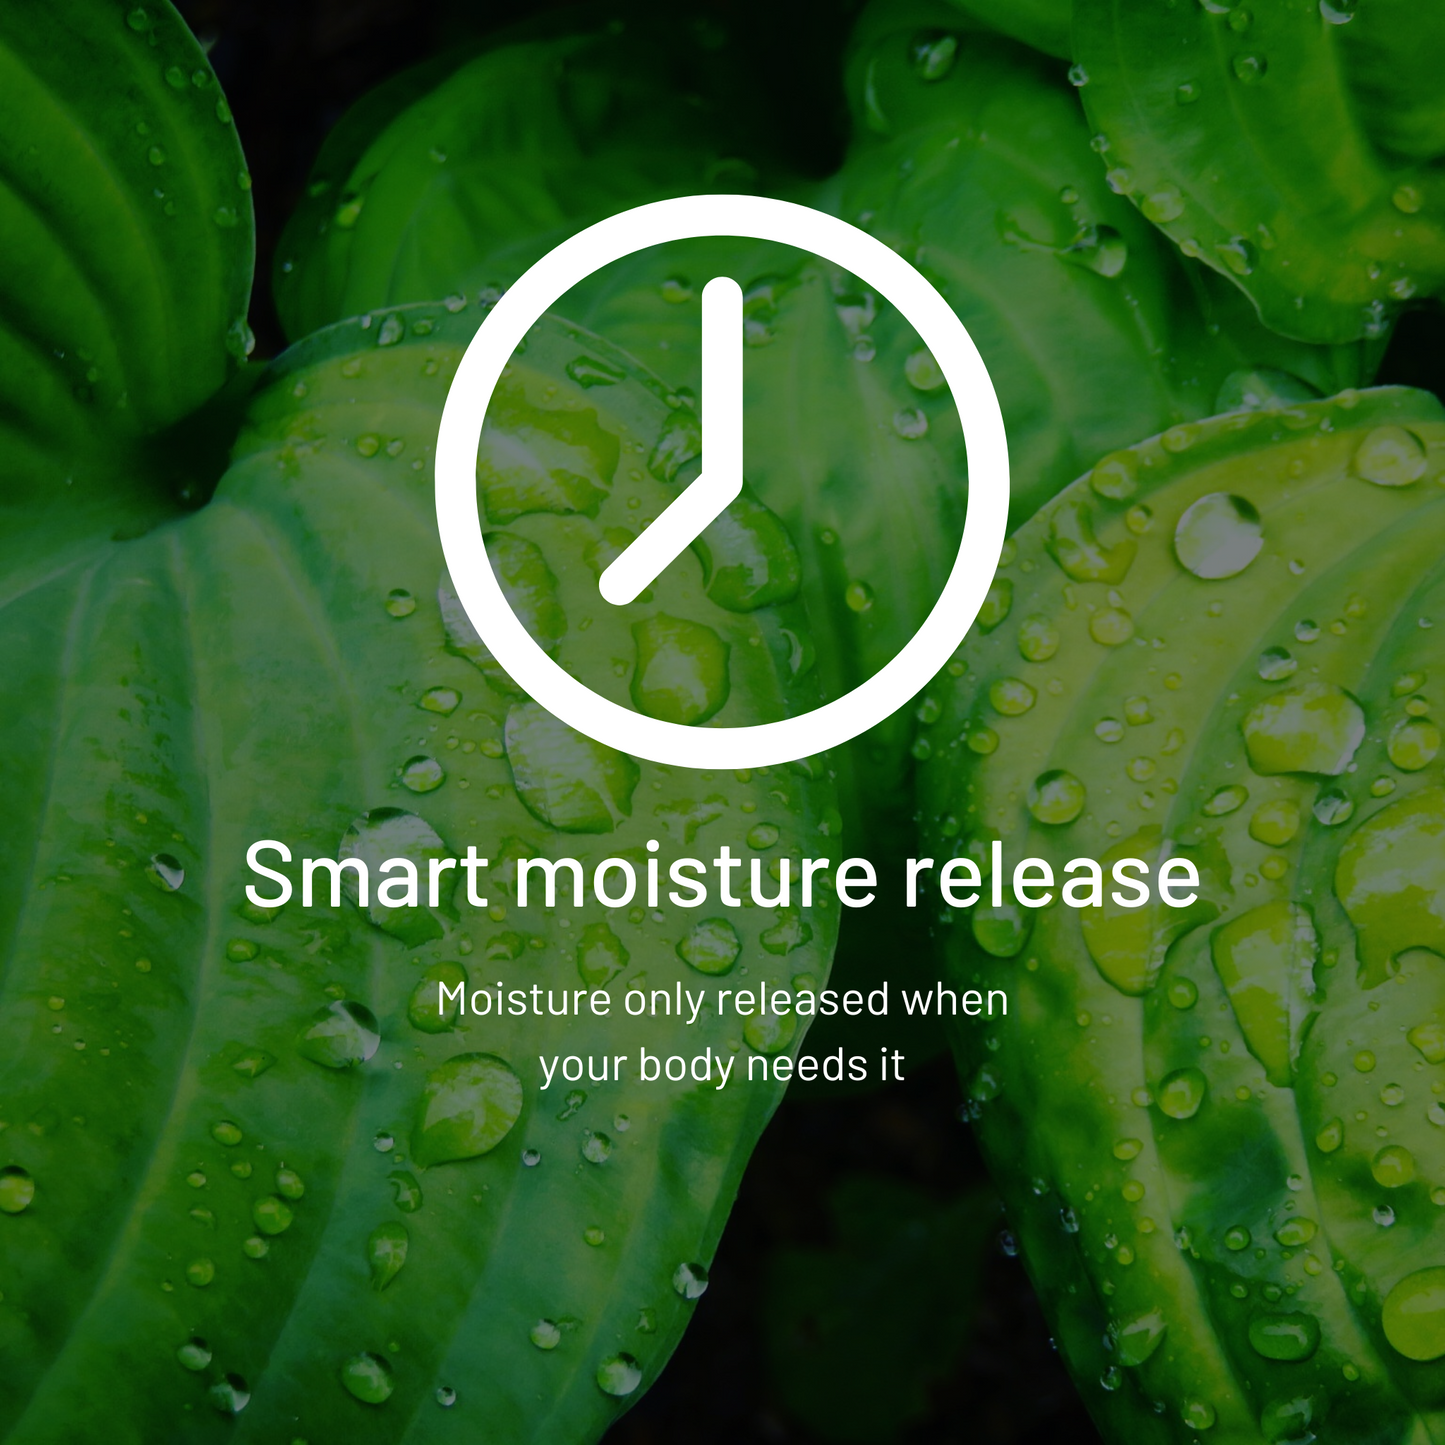 AH! YES VM Smart moisture release - Moisture is only released when your body needs it